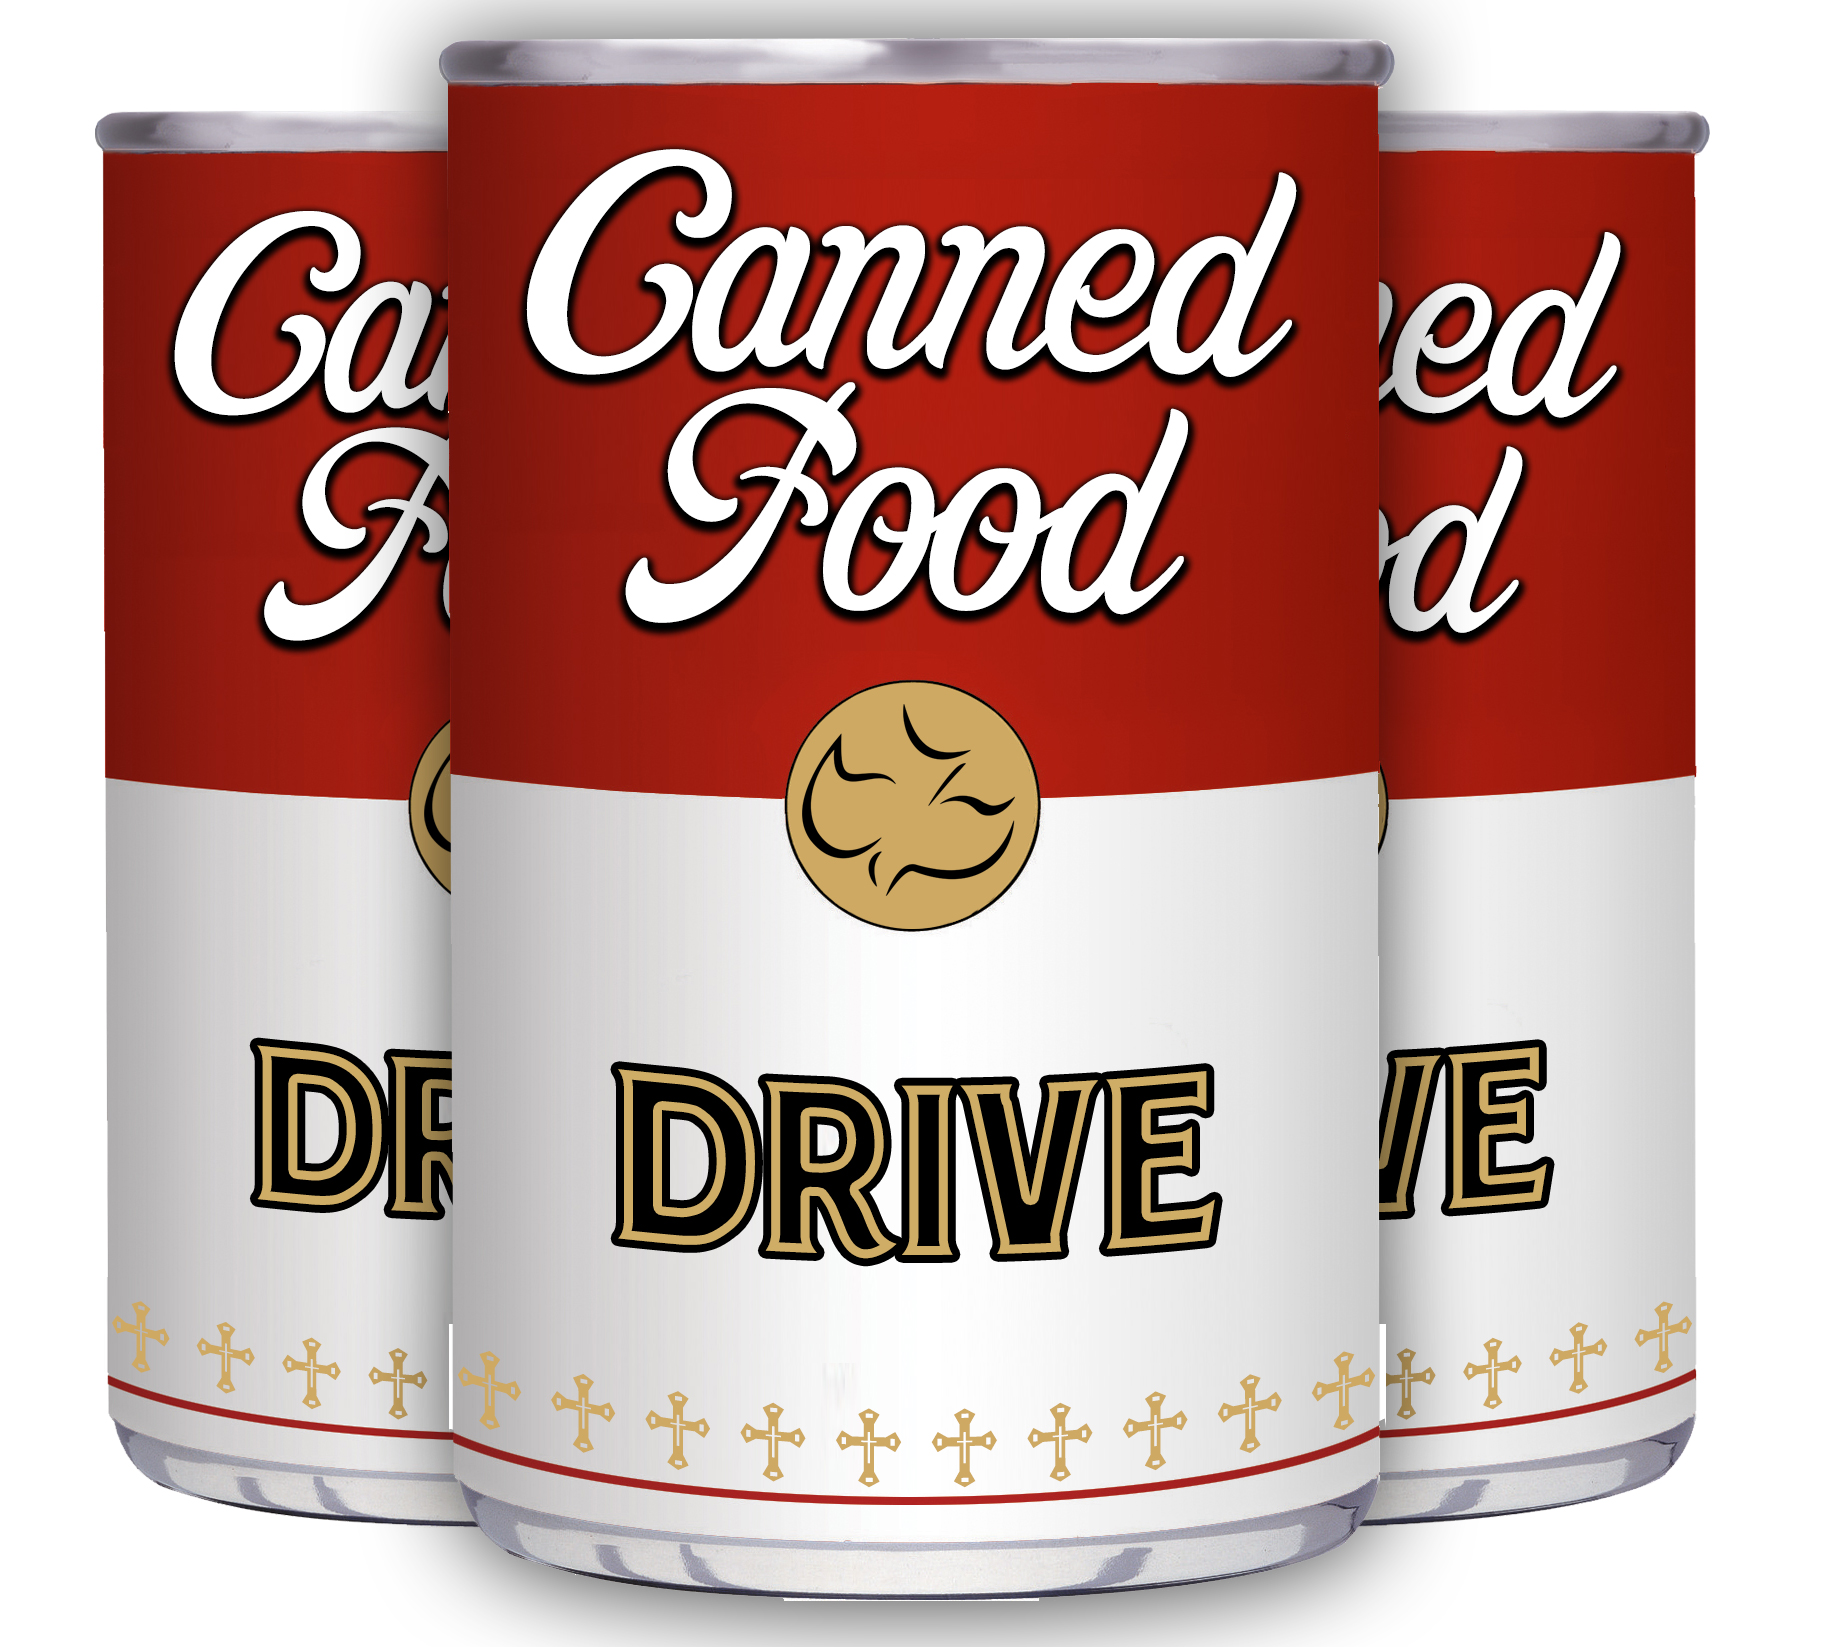 Food Drive Canned Goods